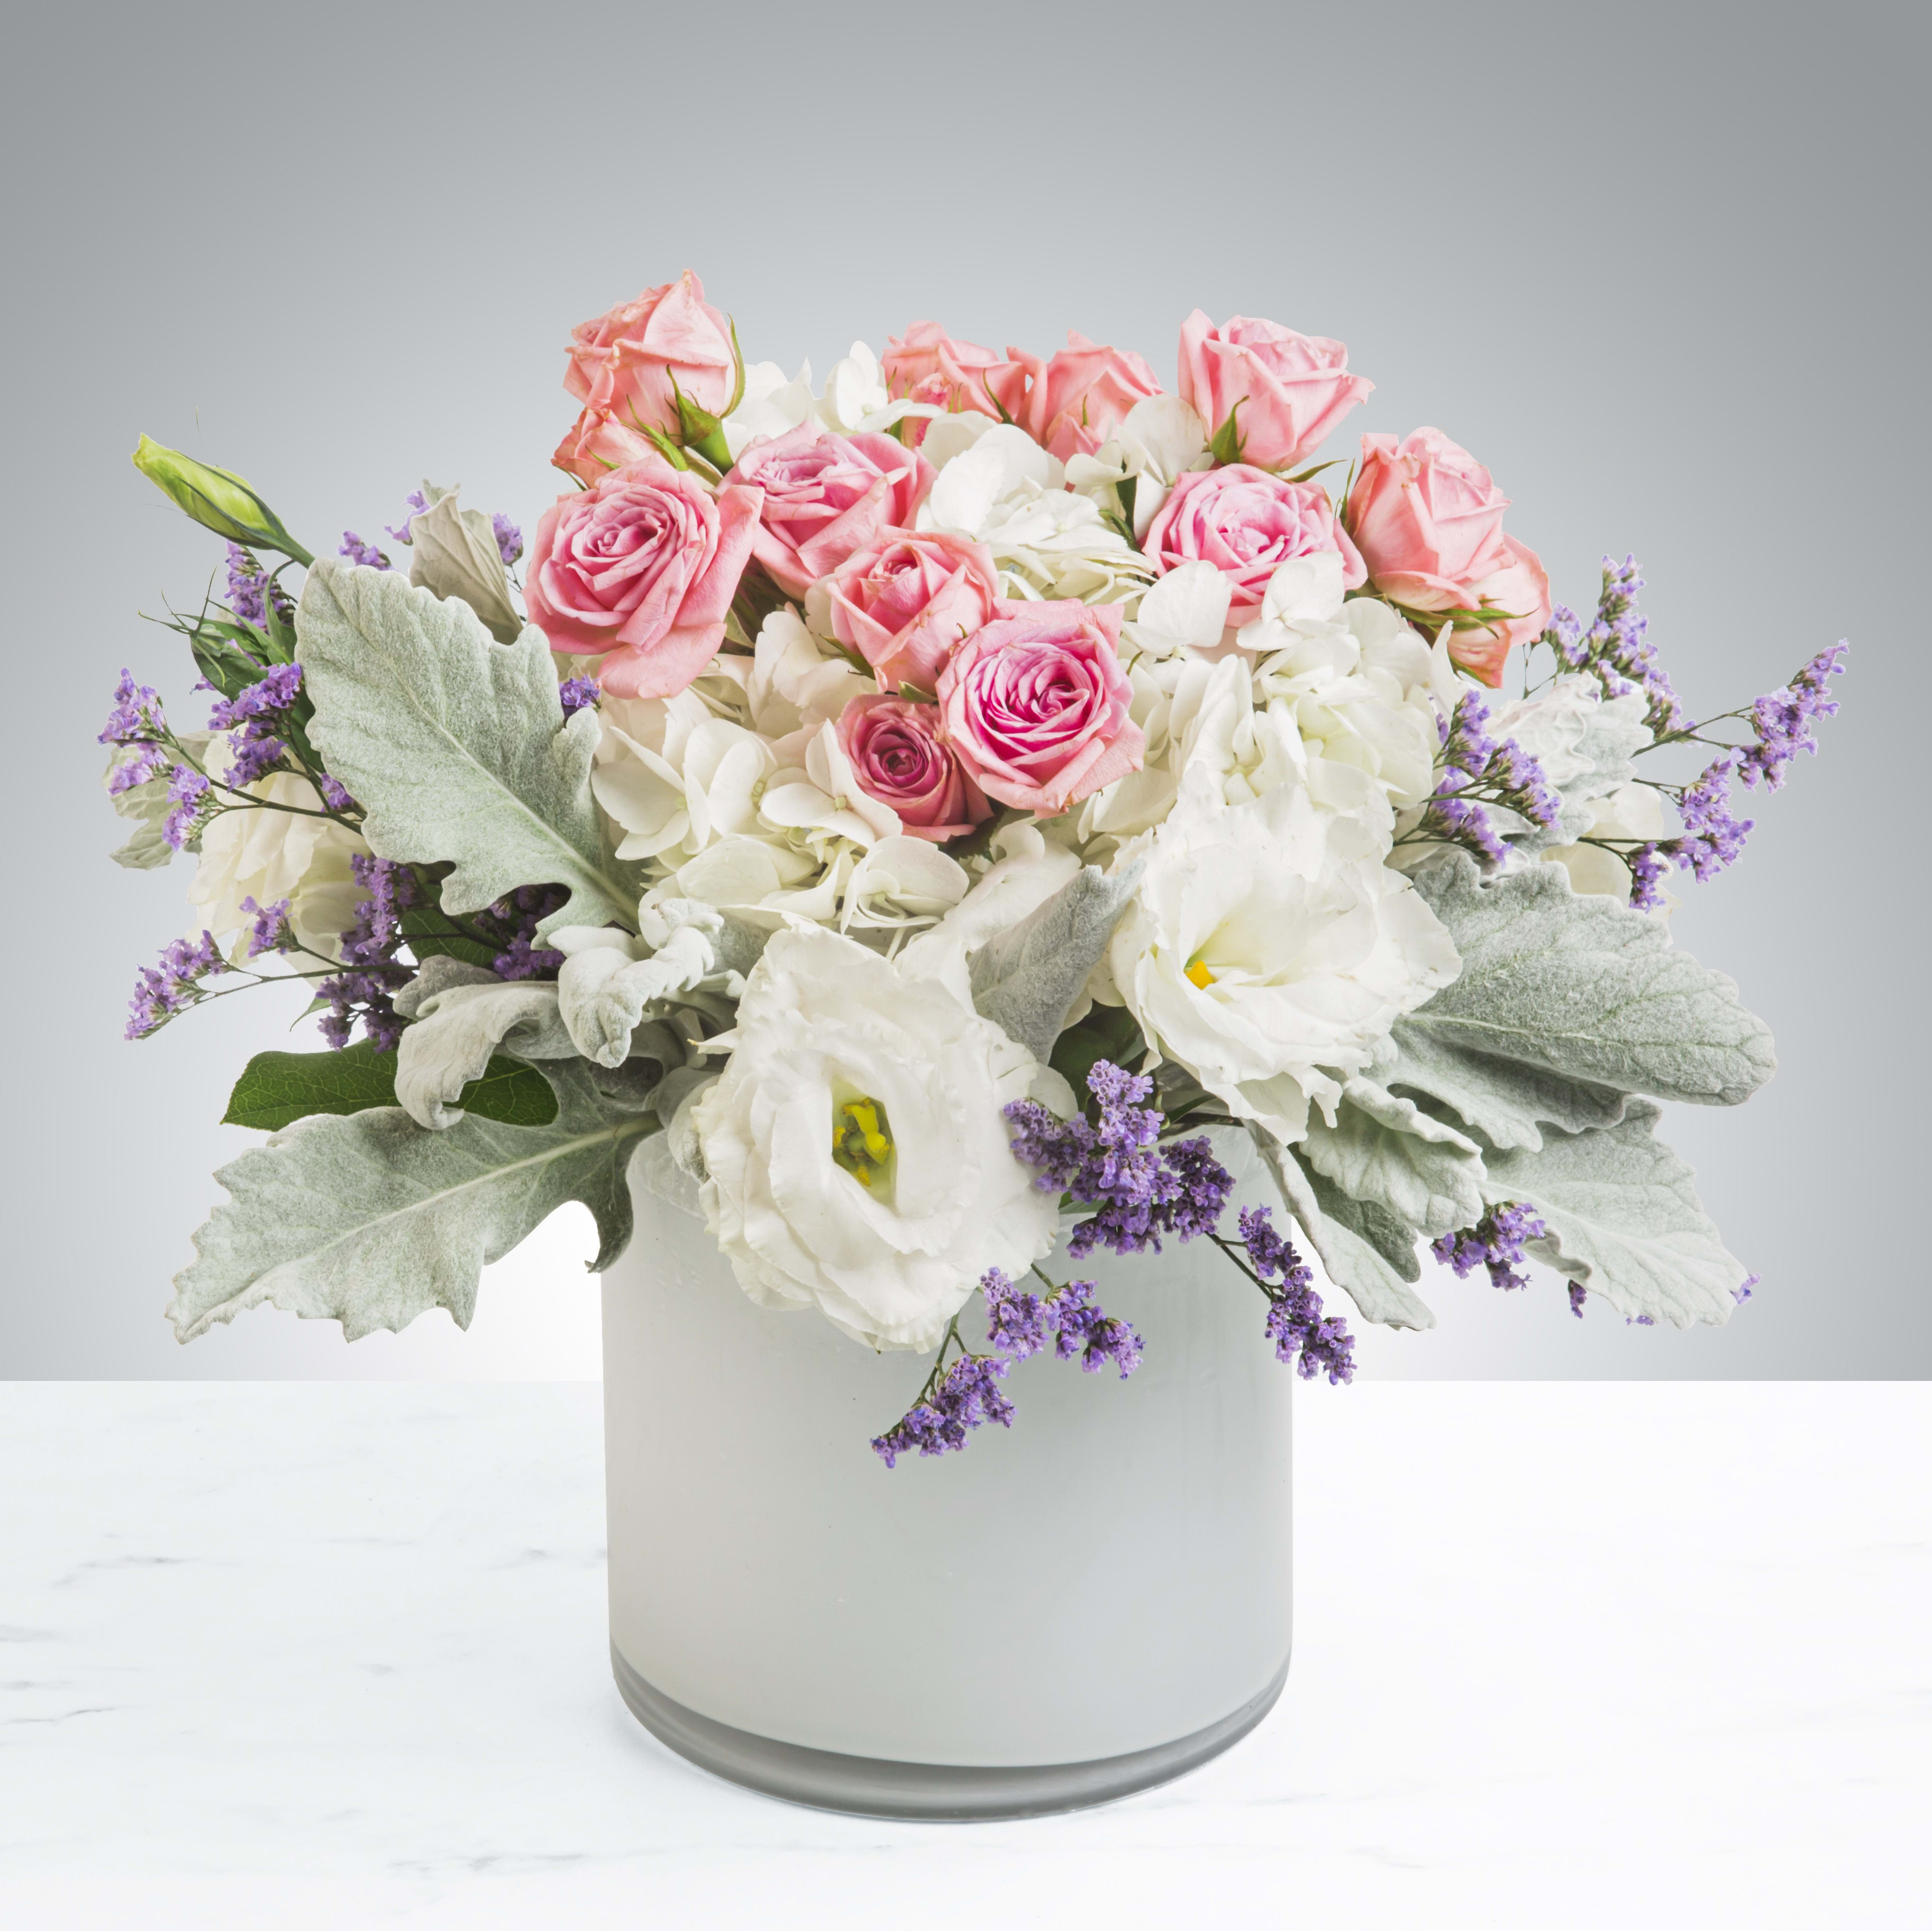 Sweet Cream by Atlanta's Finest Flowers - This angelic arrangement is as cute as it is pretty. Featuring the soft texture of lambs ear and pastel colors, Sweet Cream is a warm hug and smile. Perfect for welcoming a new baby, a birthday or making somebody's day a little sweeter. 